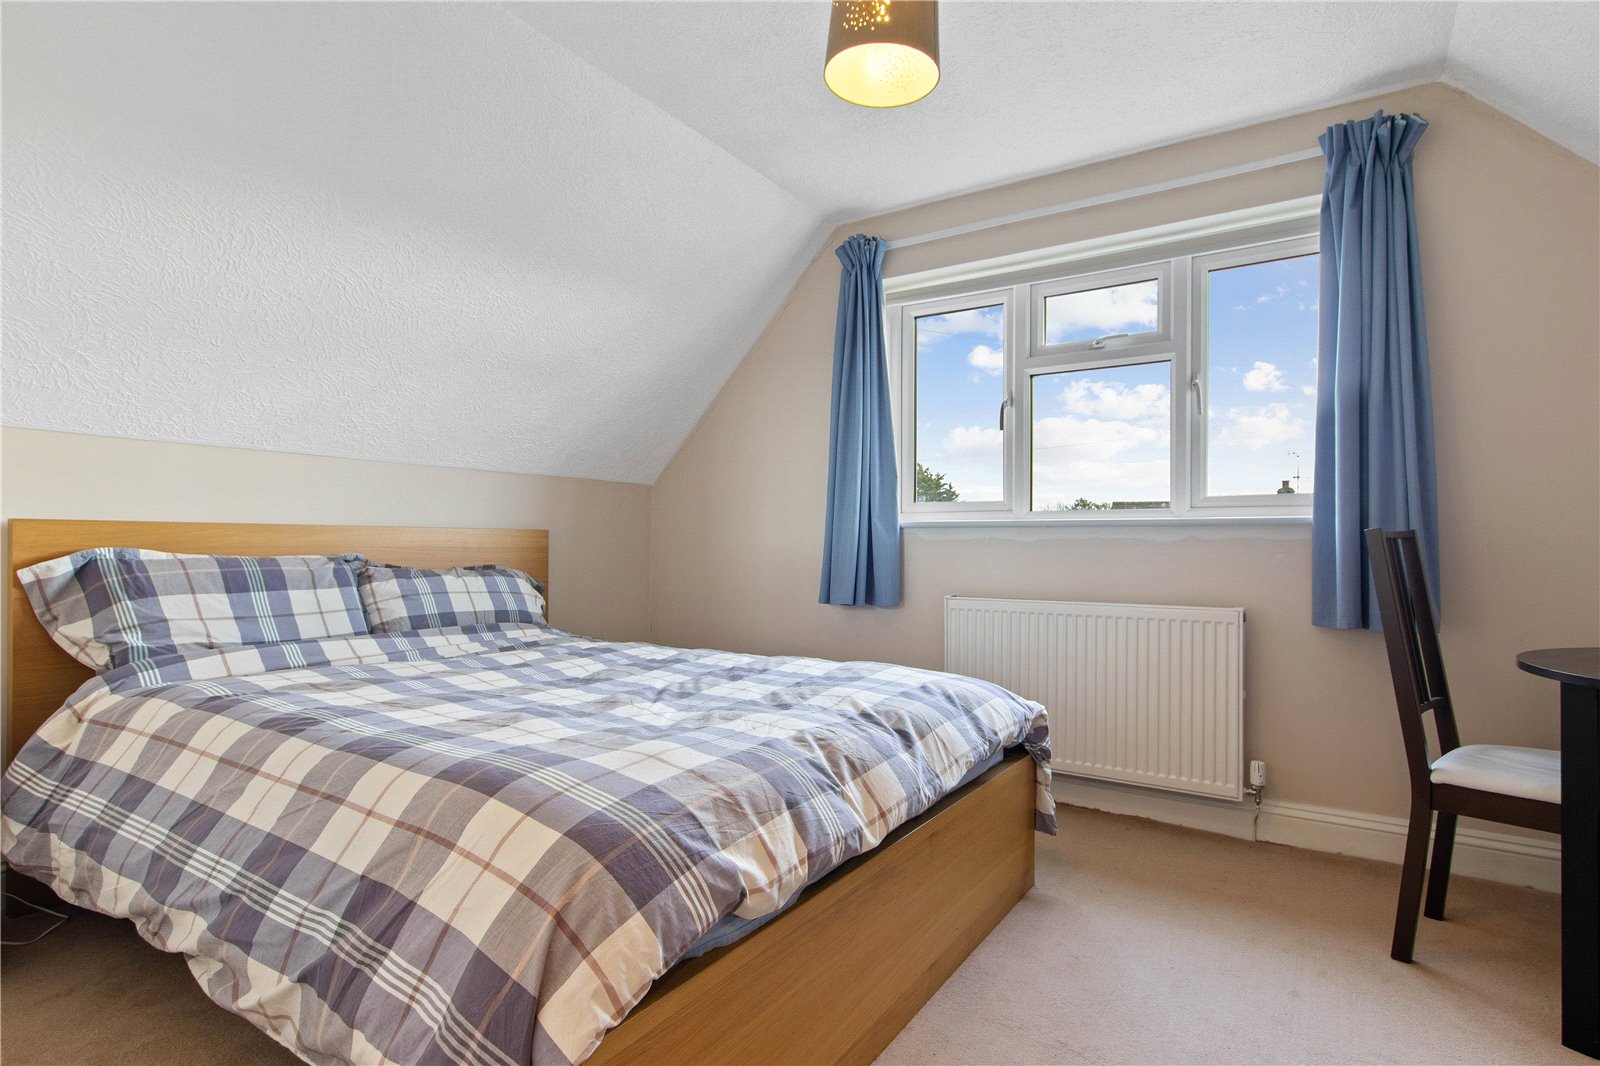 3 bed house for sale in Ancton Way, Elmer  - Property Image 5